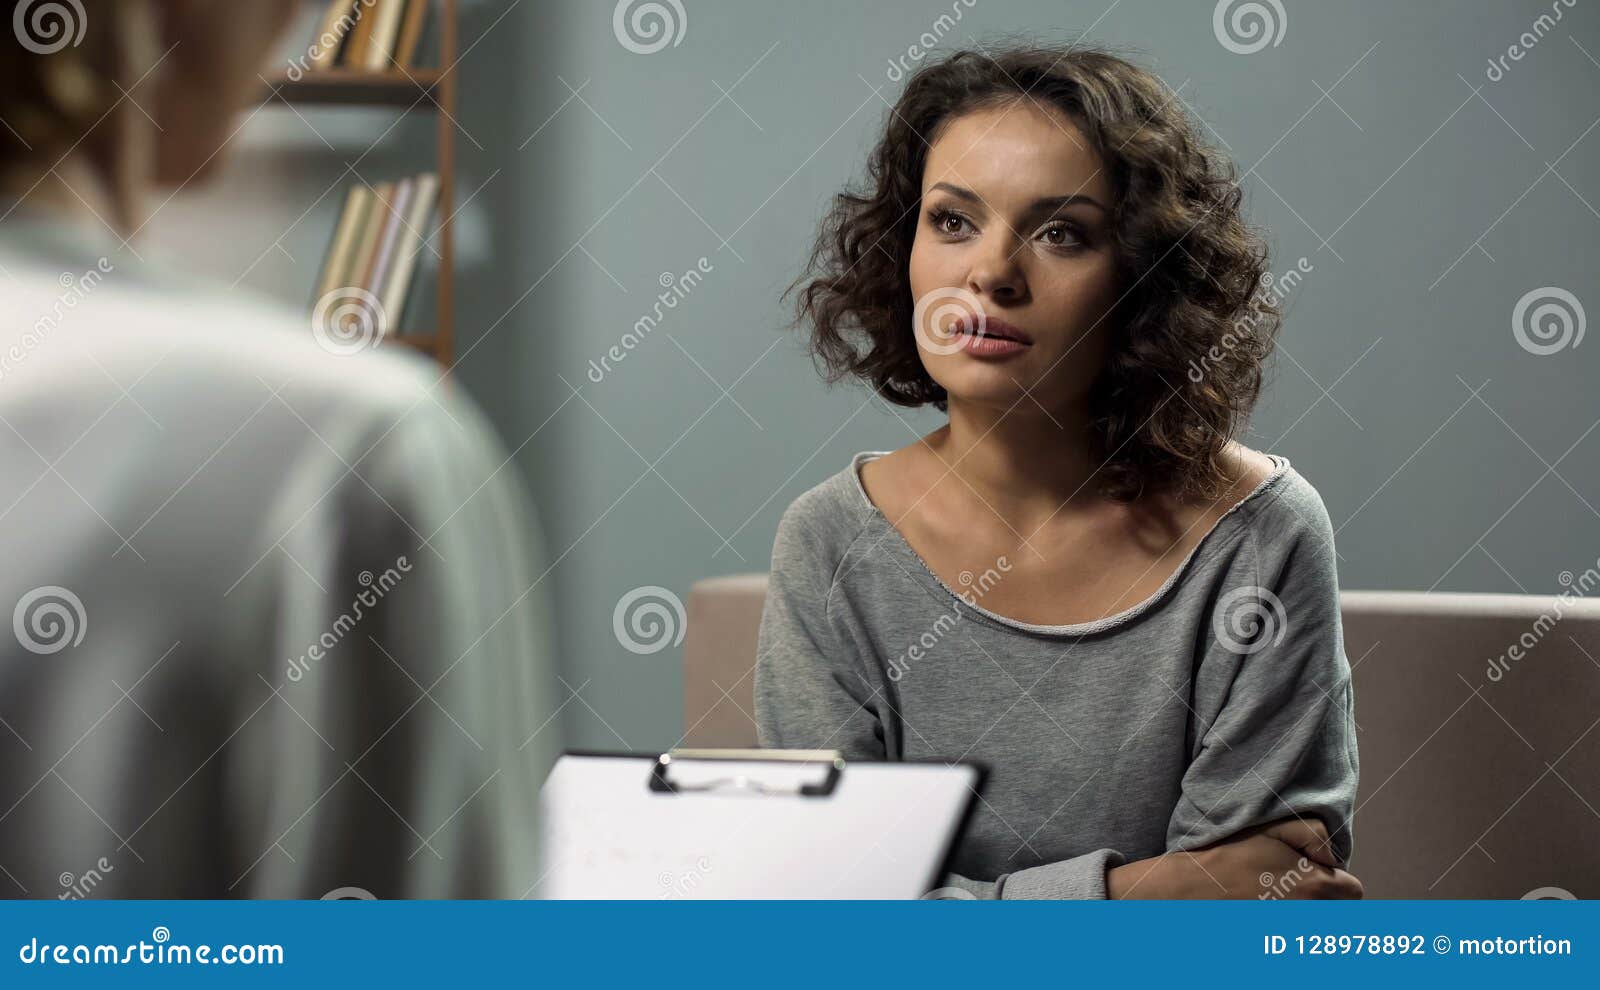 lady suffering anxiety, discussing her issues with female expert in psychiatry